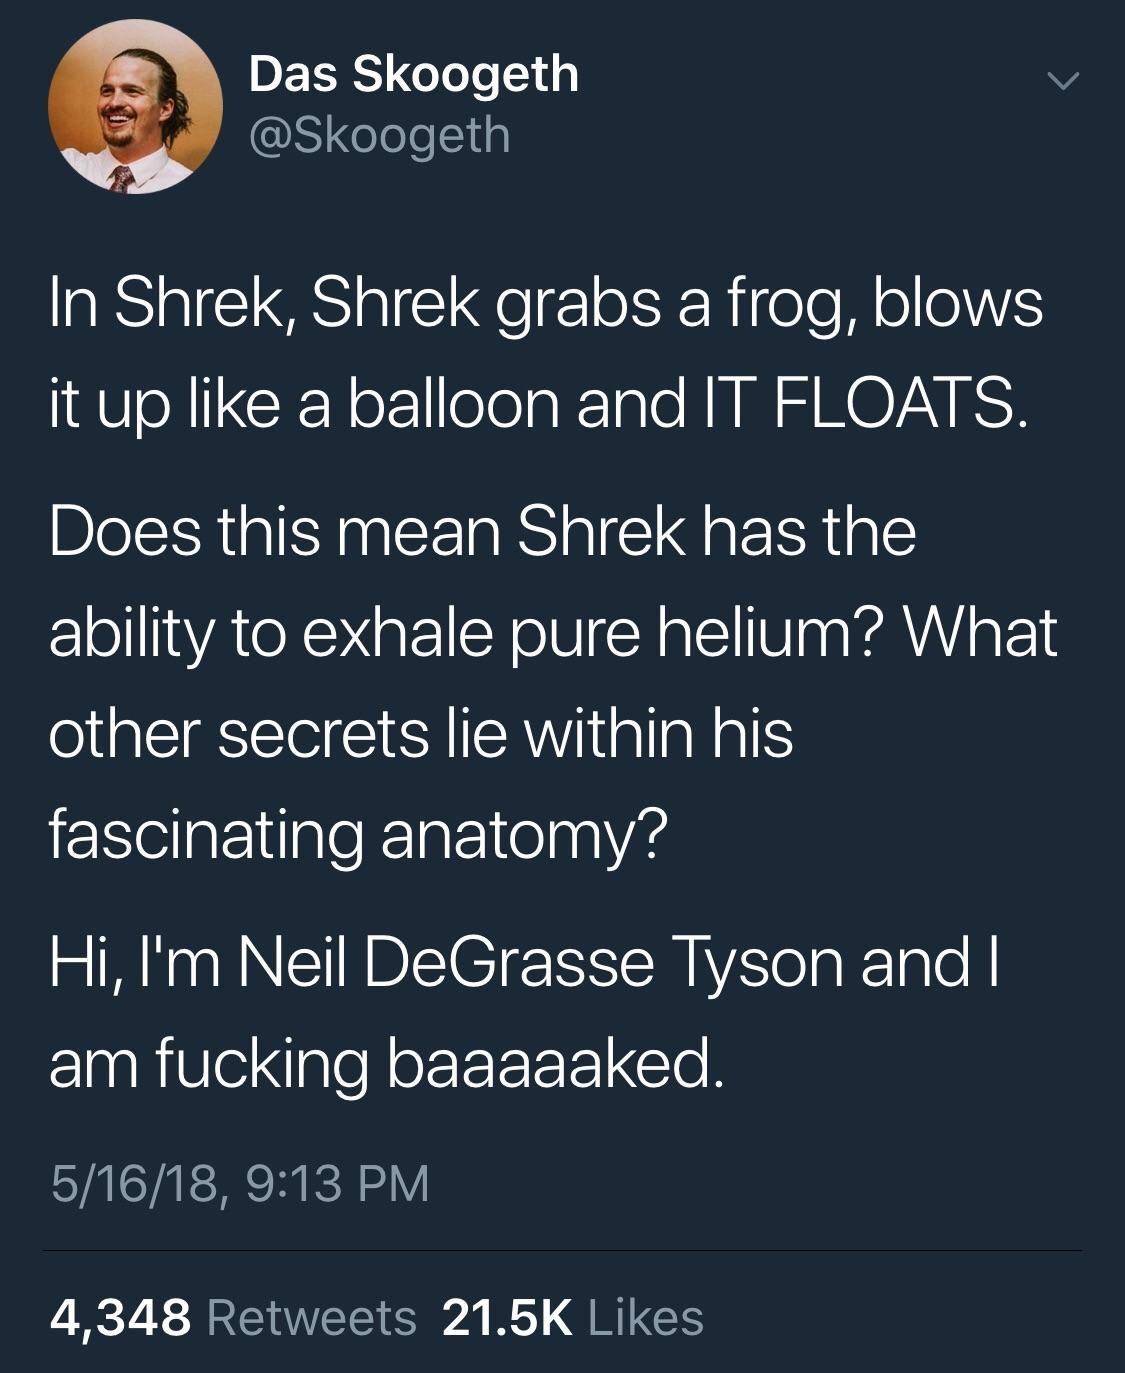 Shrek is filled with helium.